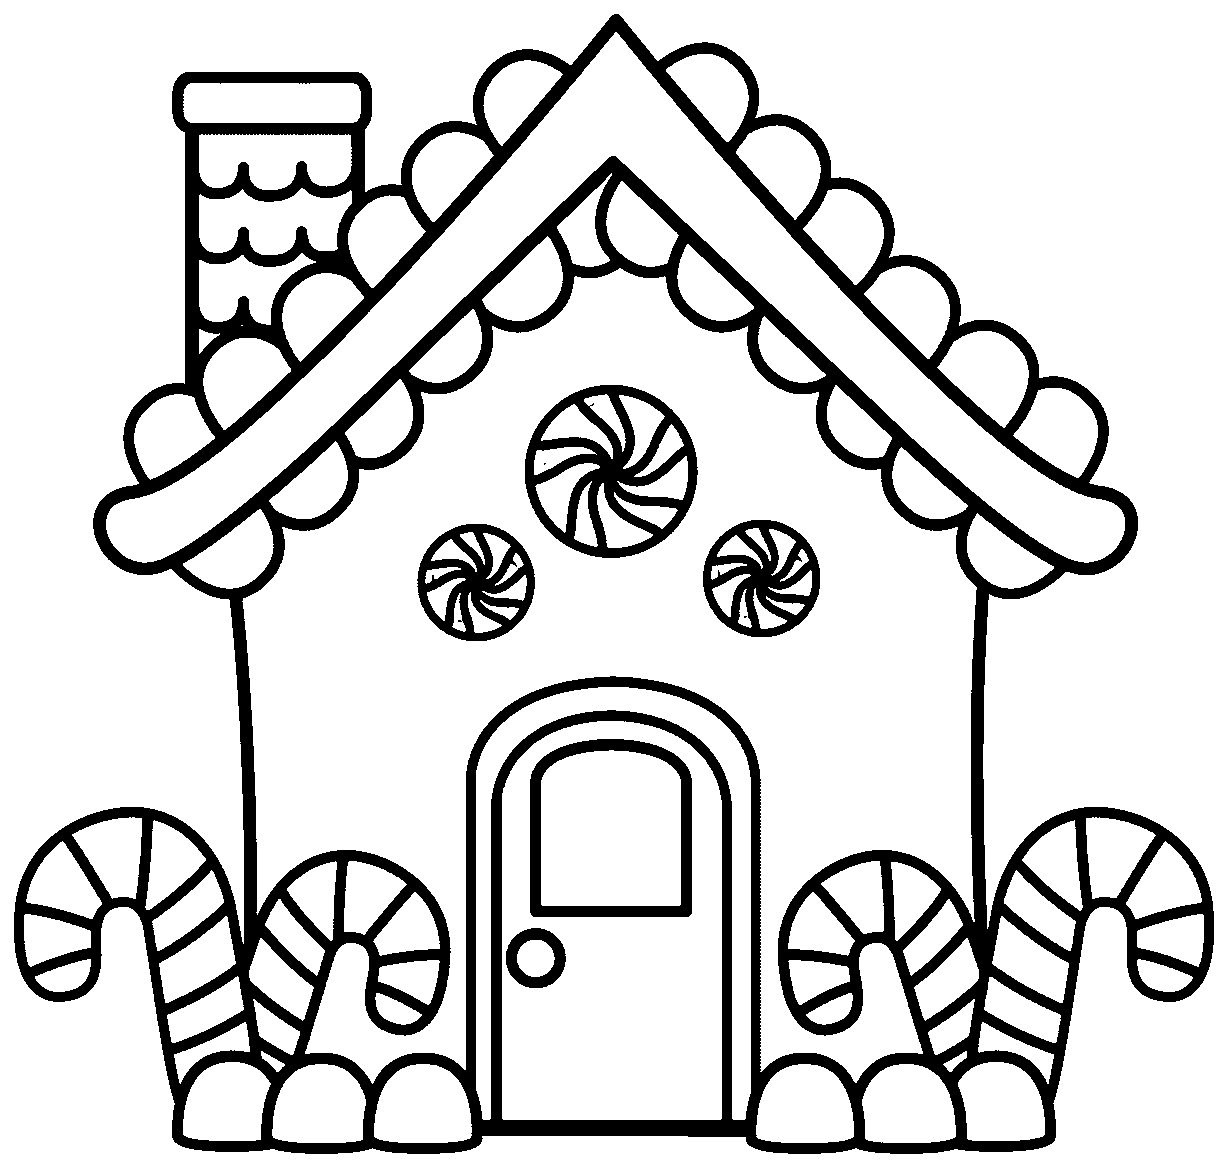 absolutely gingerbread house coloring page gingerbread house coloring page image 18